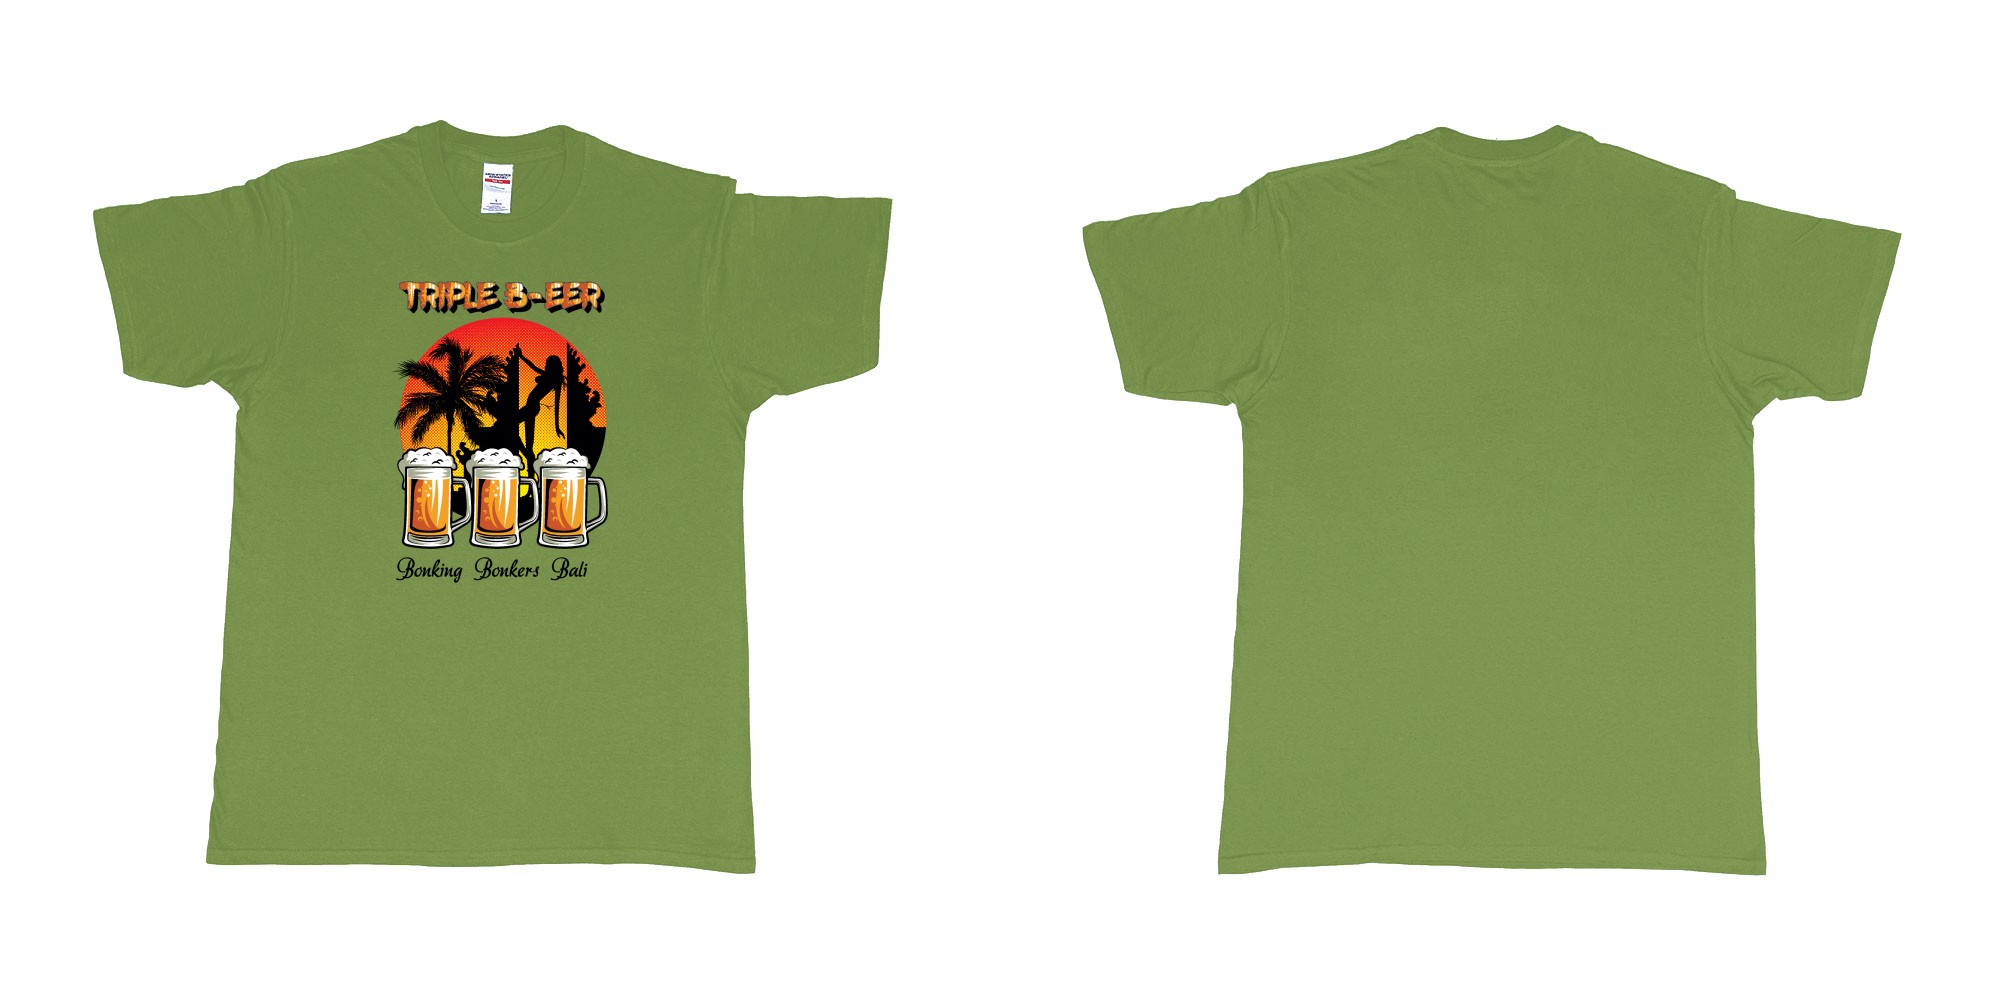 Custom tshirt design triple beer bonking bonkers bali in fabric color military-green choice your own text made in Bali by The Pirate Way